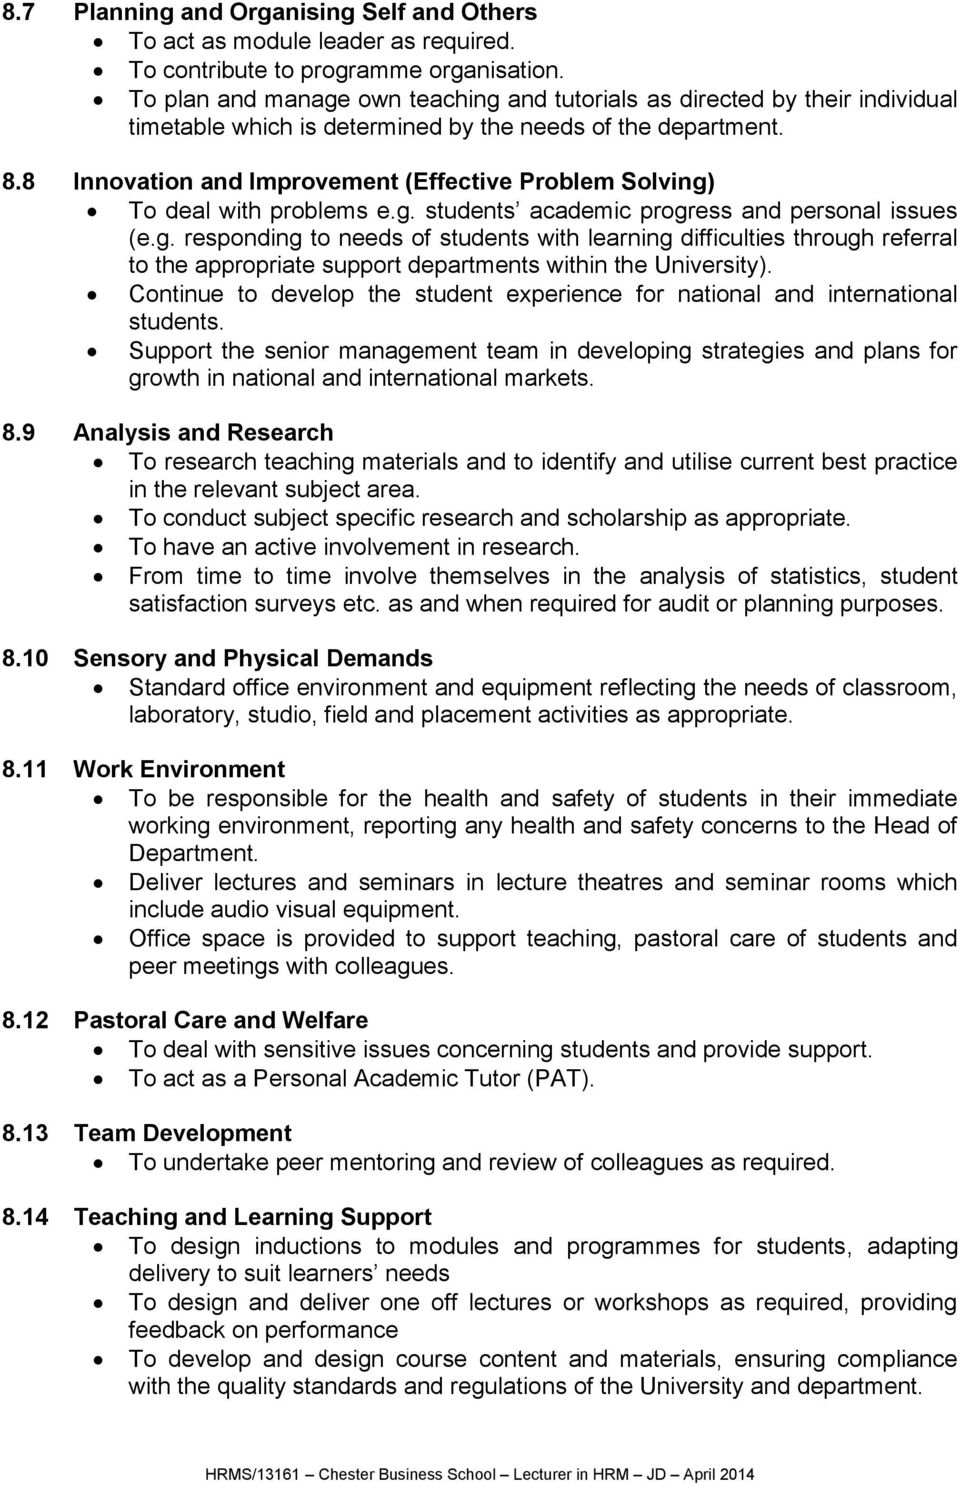 8 Innovation and Improvement (Effective Problem Solving) To deal with problems e.g. students academic progress and personal issues (e.g. responding to needs of students with learning difficulties through referral to the appropriate support departments within the University).